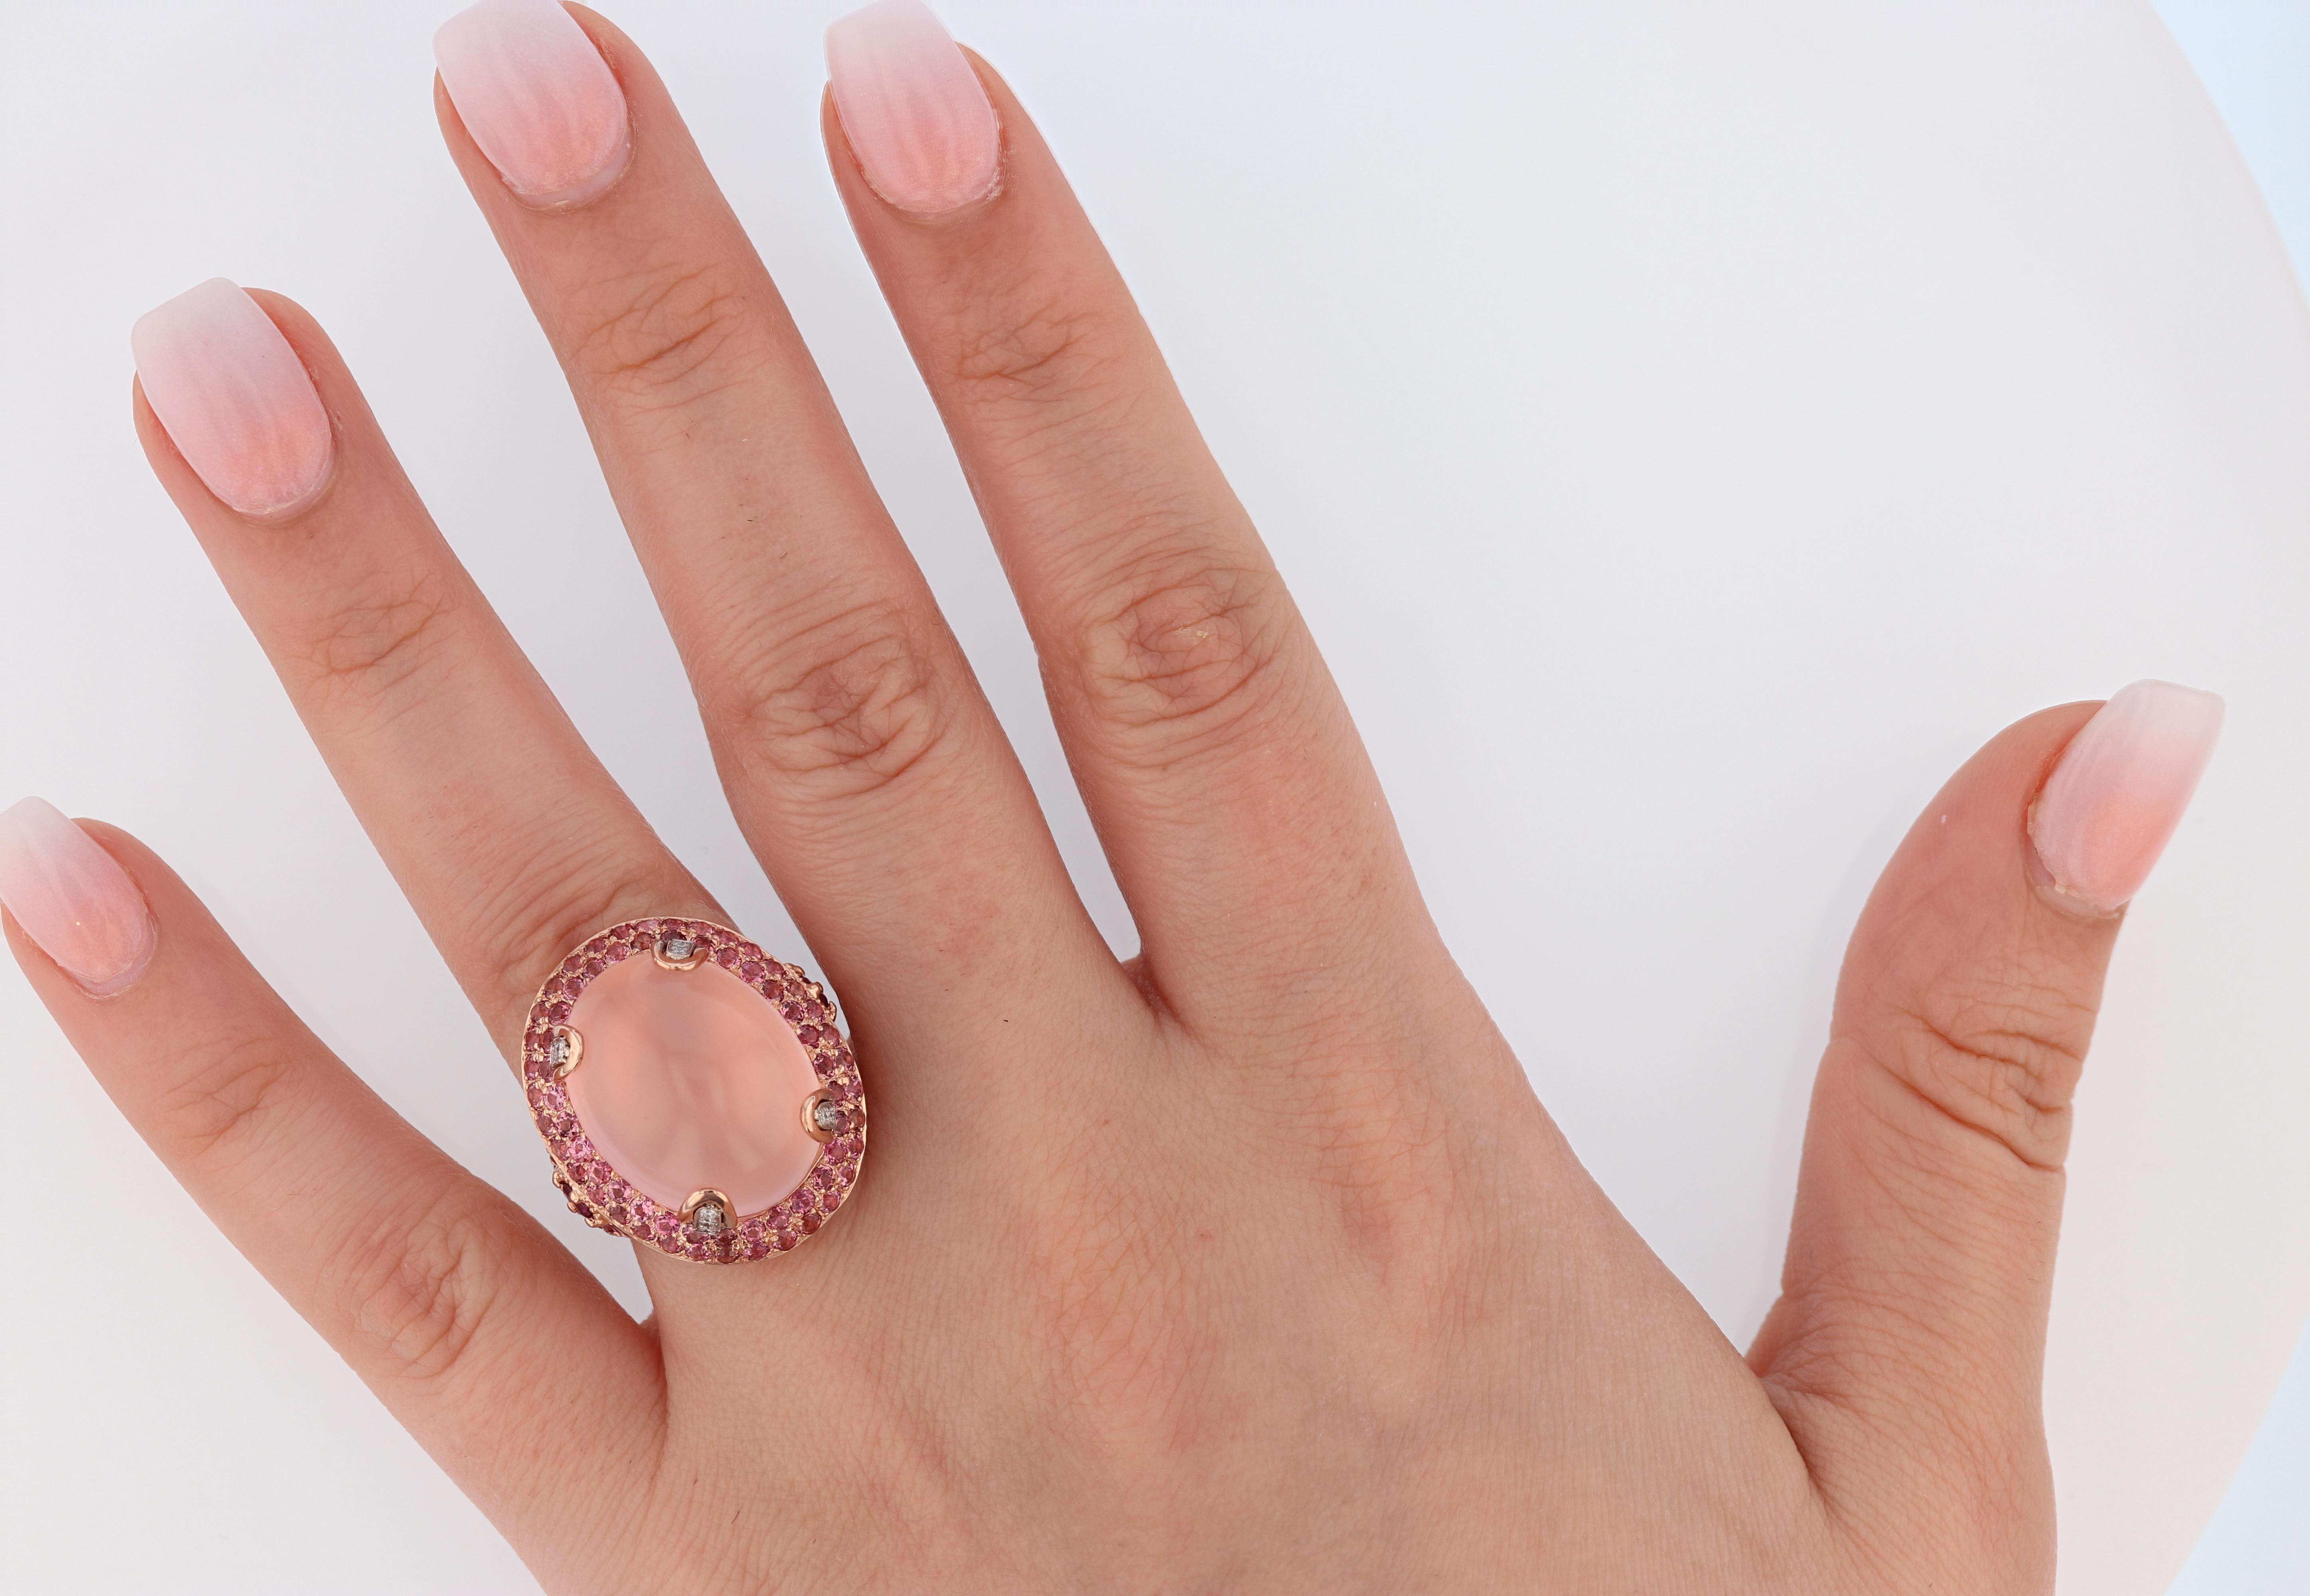 This ring is made in 14k rose gold featuring one 19.5 x 15 MM rose quartz and 2 prong set garnets weighing 0.33ct. Also this ring features 120 pave set round cut pink tourmaline on the halo and split shank. There are 12 round cut diamonds pave set